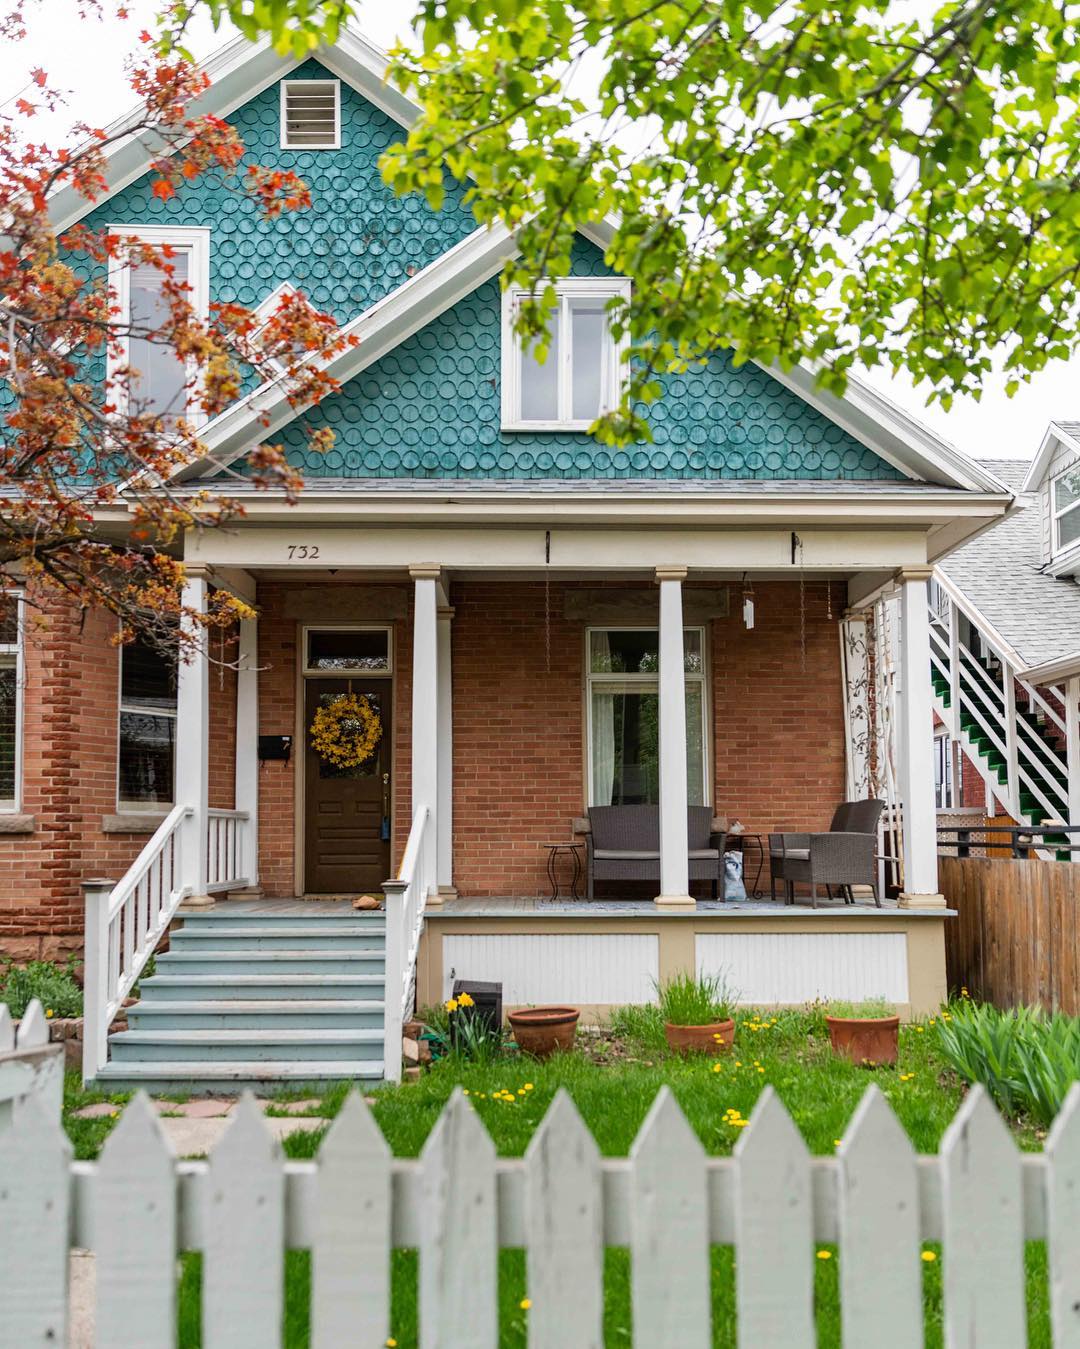 Small Victorian Bungalow in Central City, Salt Lake City. Photo by Instagram user @thevictorianbungalow